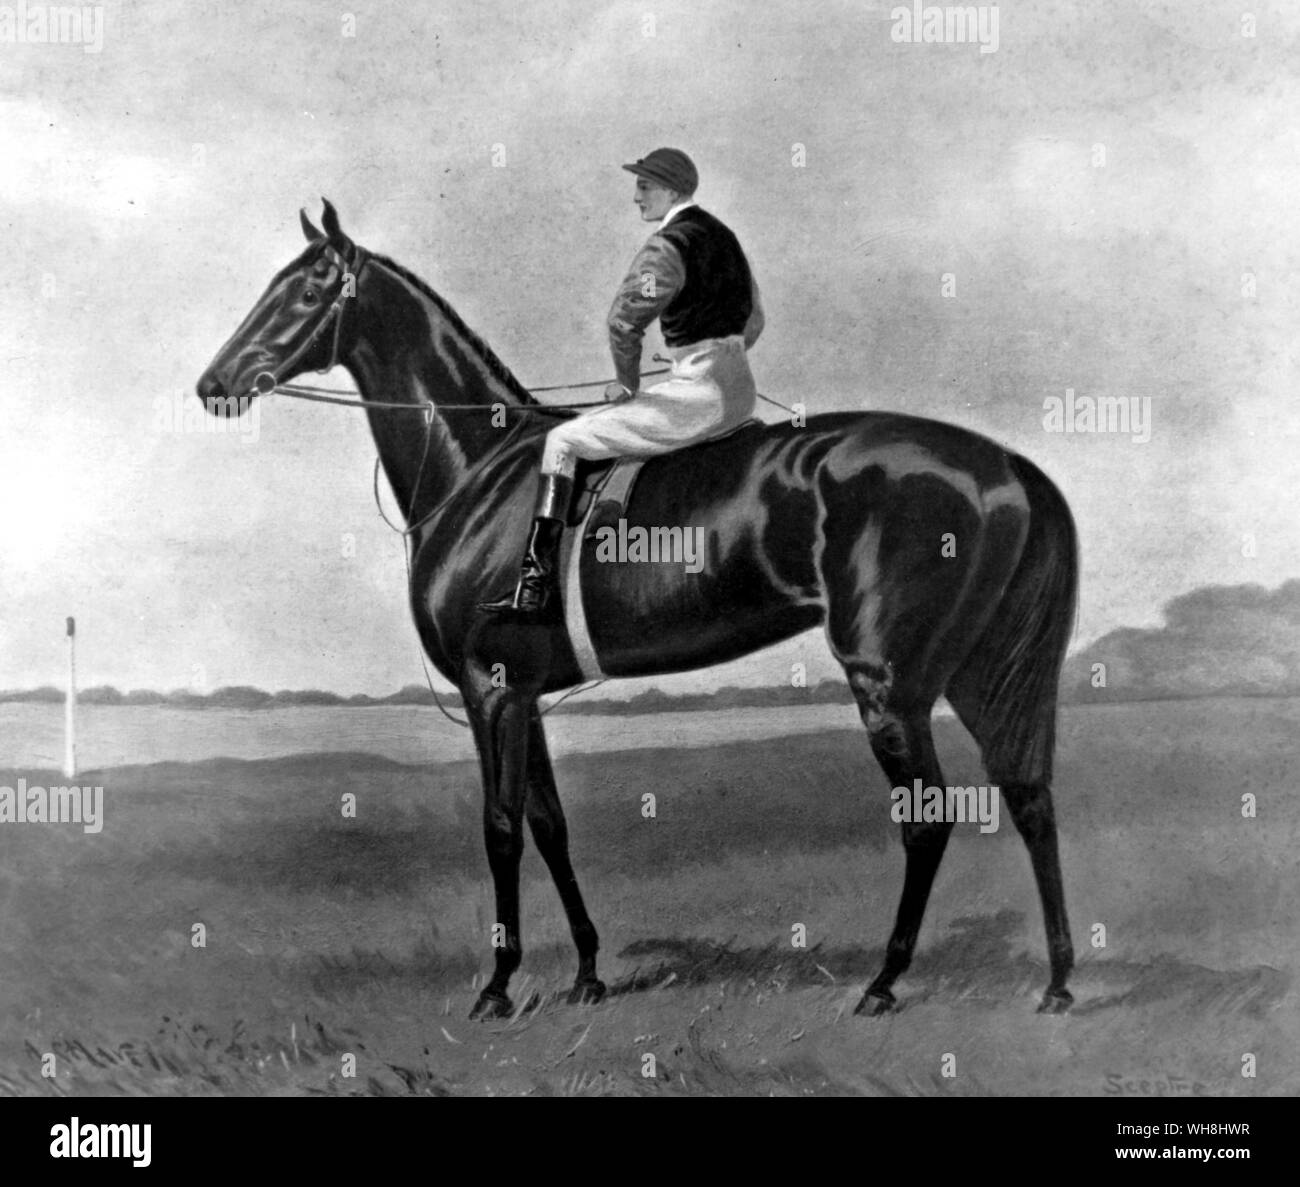 One of the greatest half-dozen mares in racing history, bred 1899 by Persimmon out of Ornament, and changing hands surprisingly often. She ran 25 times. Her 13 wins included every classic, except the Derby, of 1902. Like her younger contemporary Pretty Polly she was a disappointment at stud in the short term, but an important influence in the long. The History of Horse Racing by Roger Longrigg, pages 276-7.. . . Stock Photo